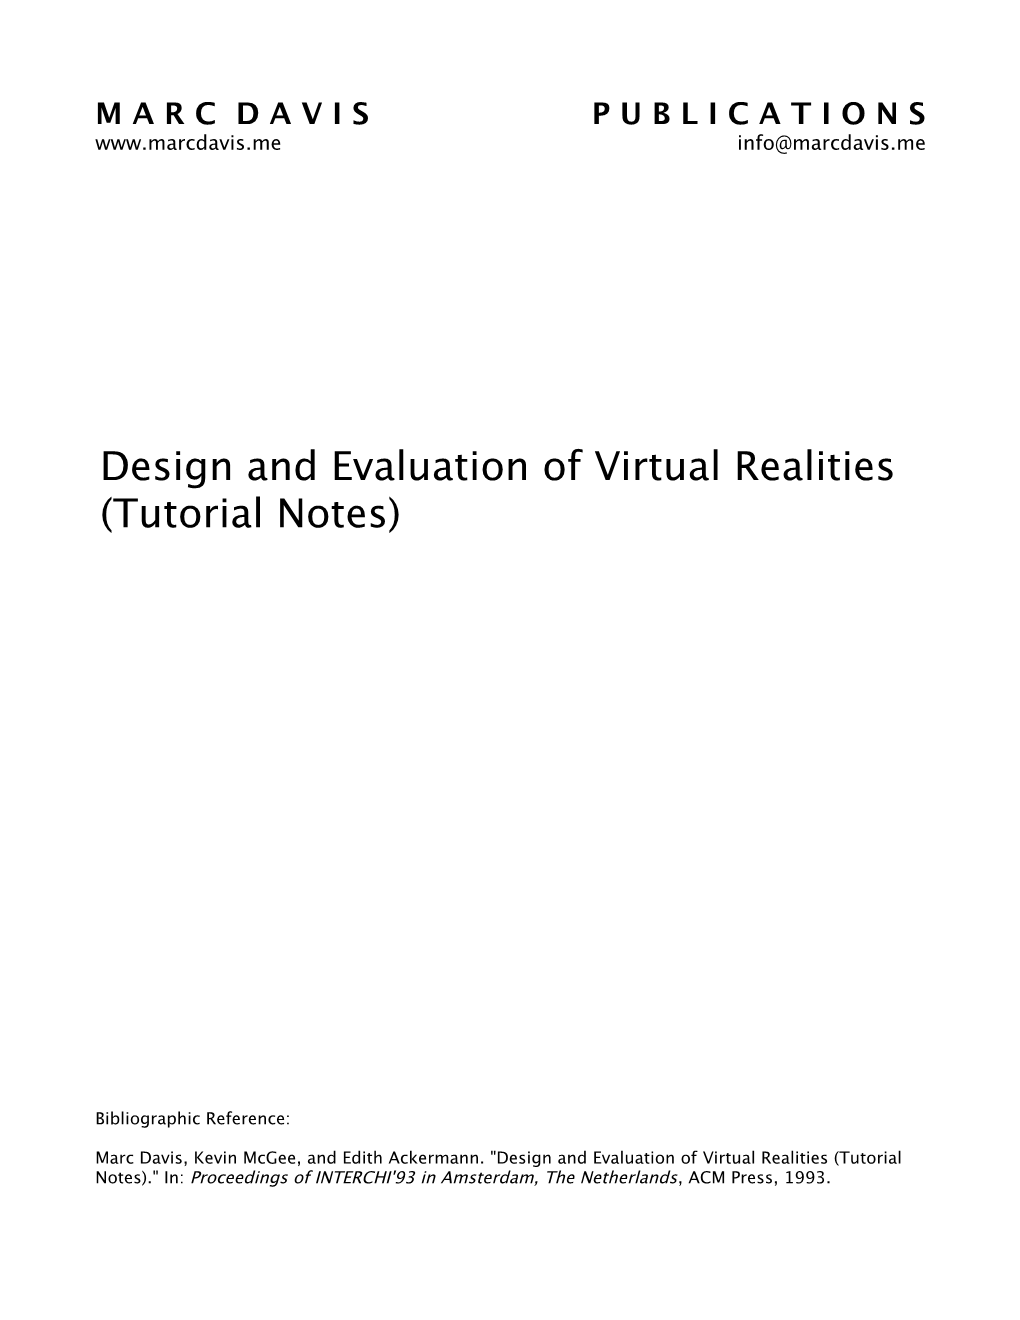 Design and Evaluation of Virtual Realities (Tutorial Notes)." In: Proceedings of INTERCHI'93 in Amsterdam, the Netherlands, ACM Press, 1993